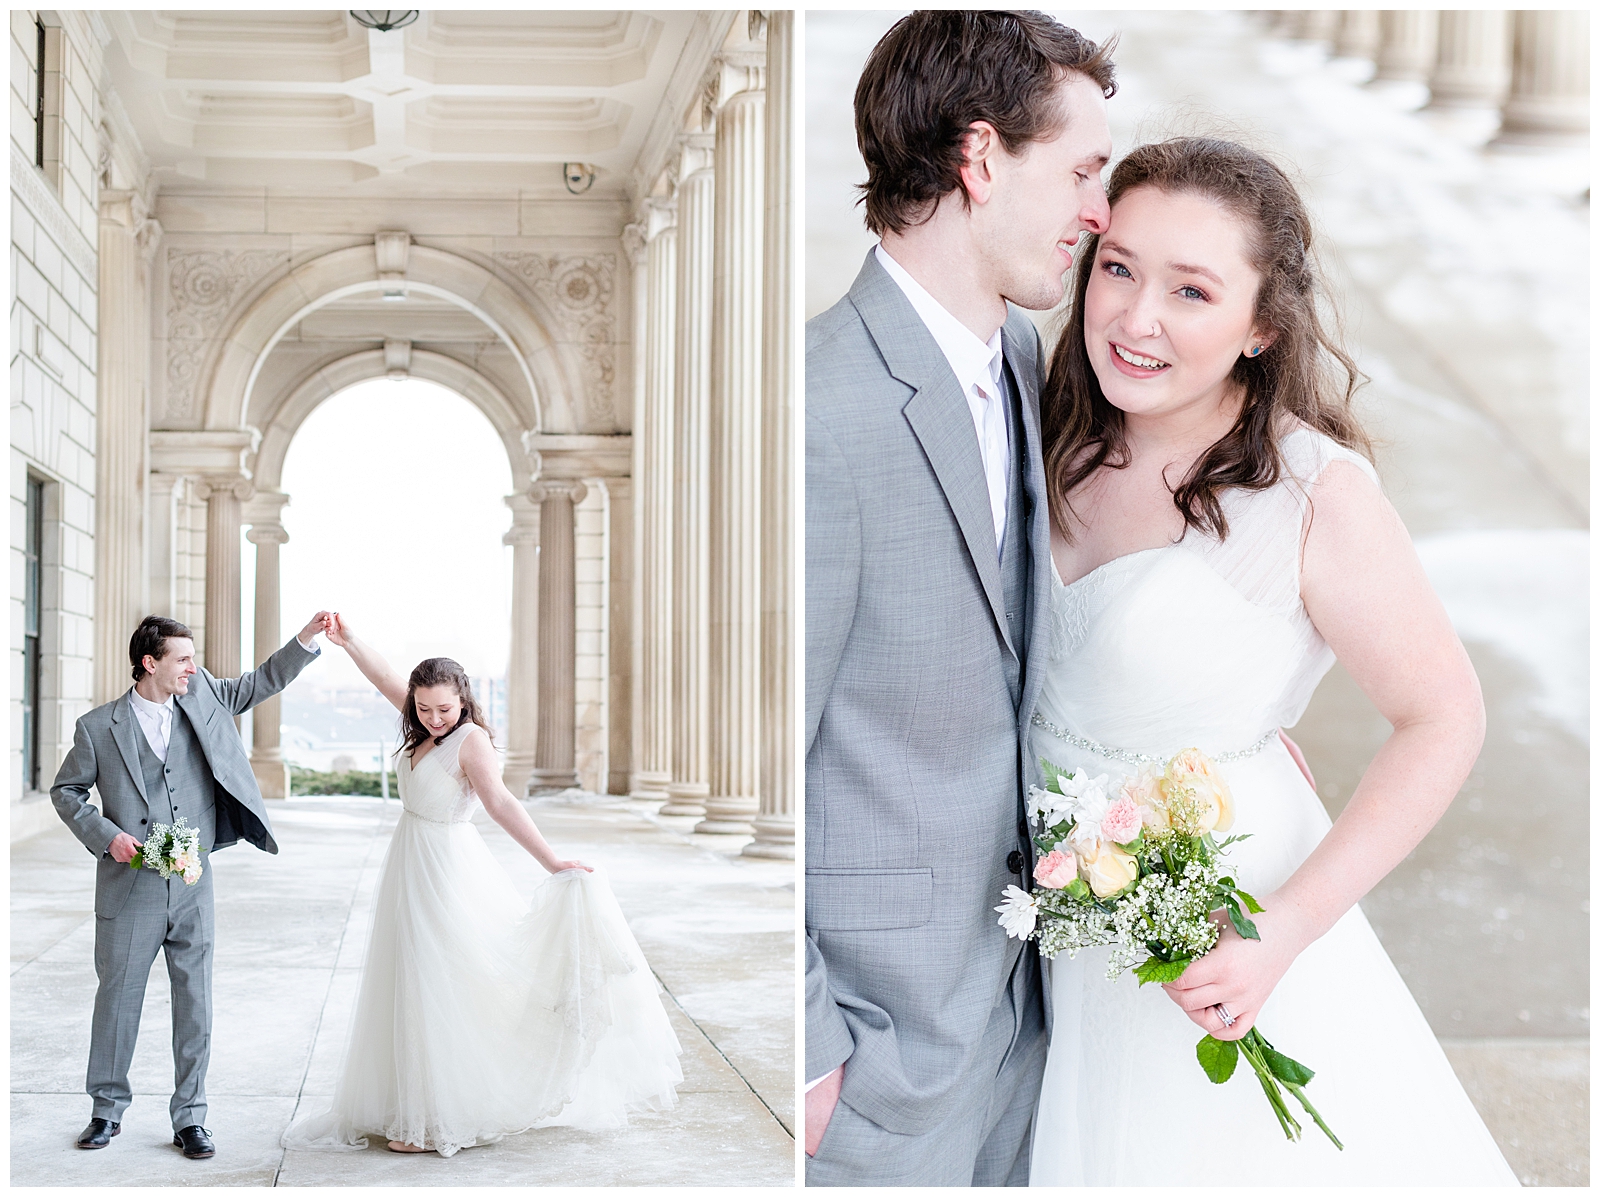 Six Things To Do After The Wedding Day - Leidy & Josh Photography